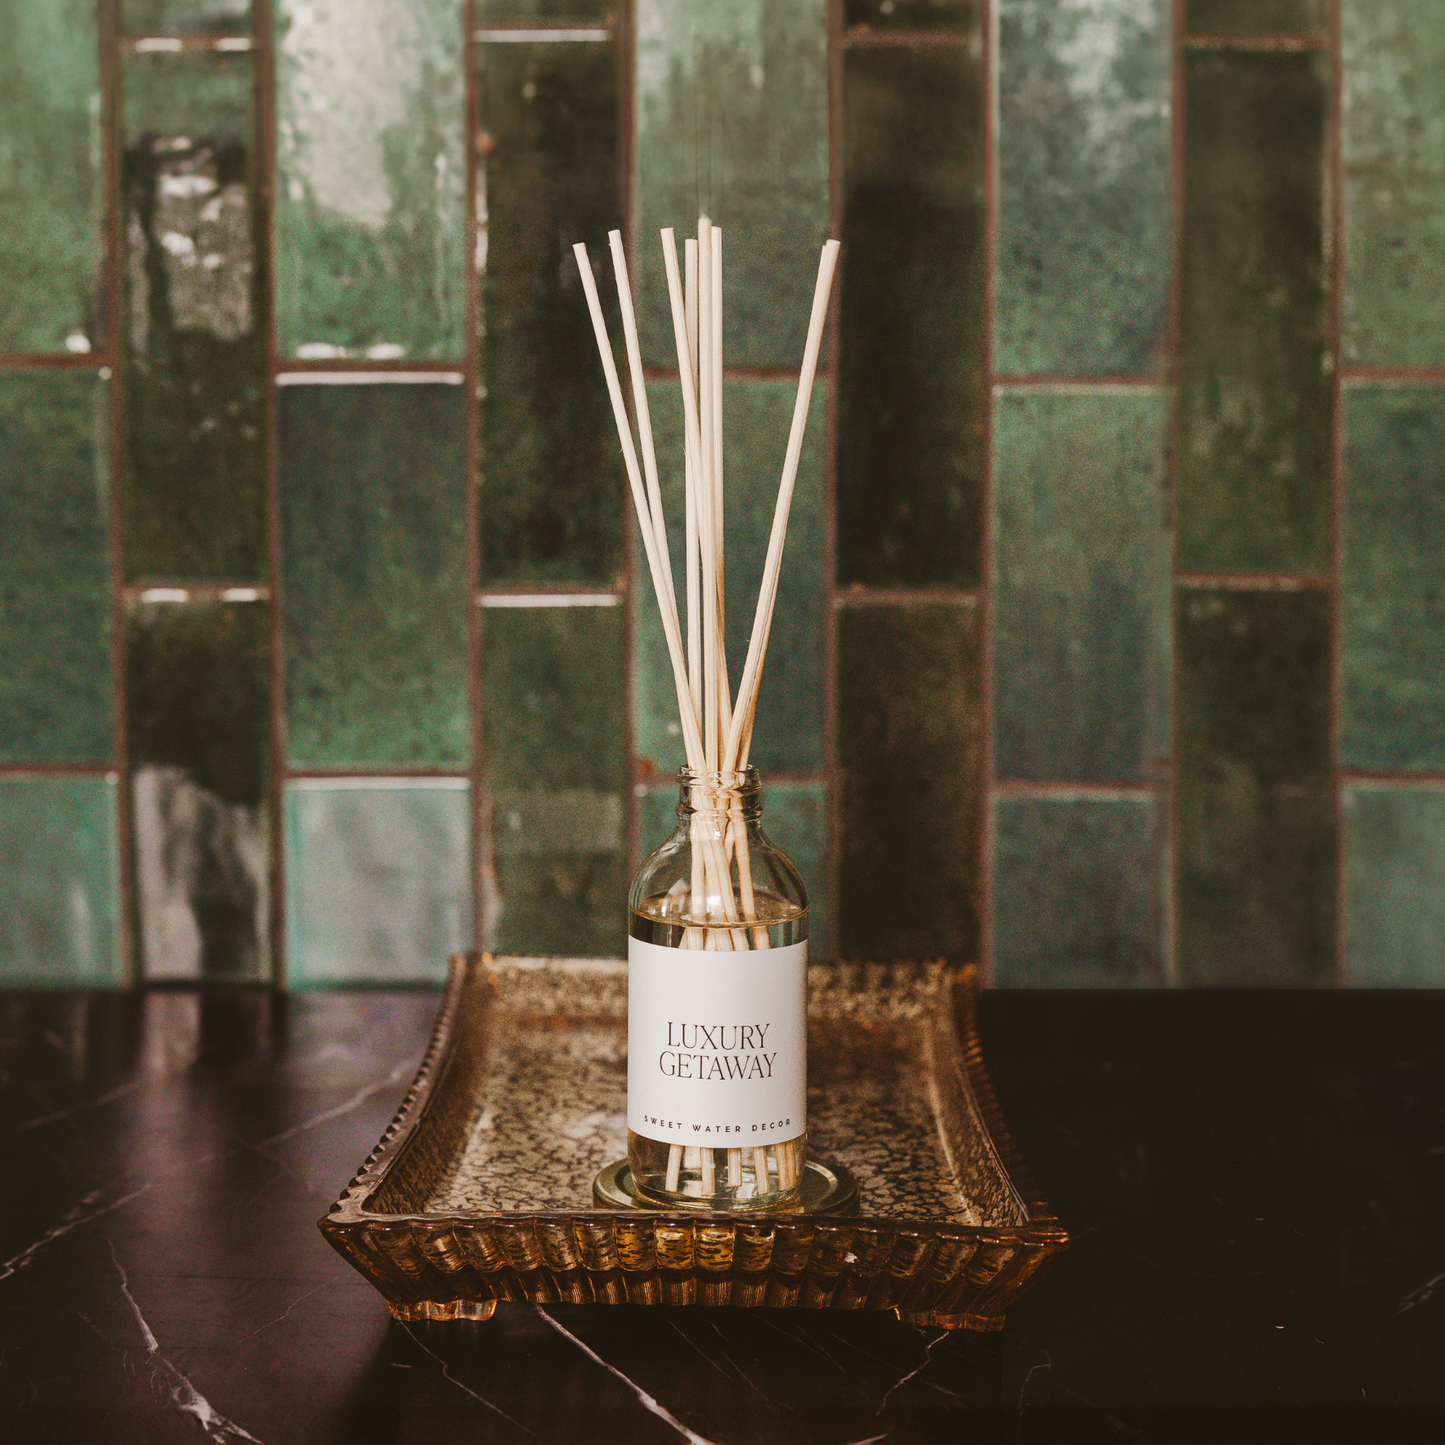 Luxury Getaway Reed Diffuser- Gifts & Home Decor